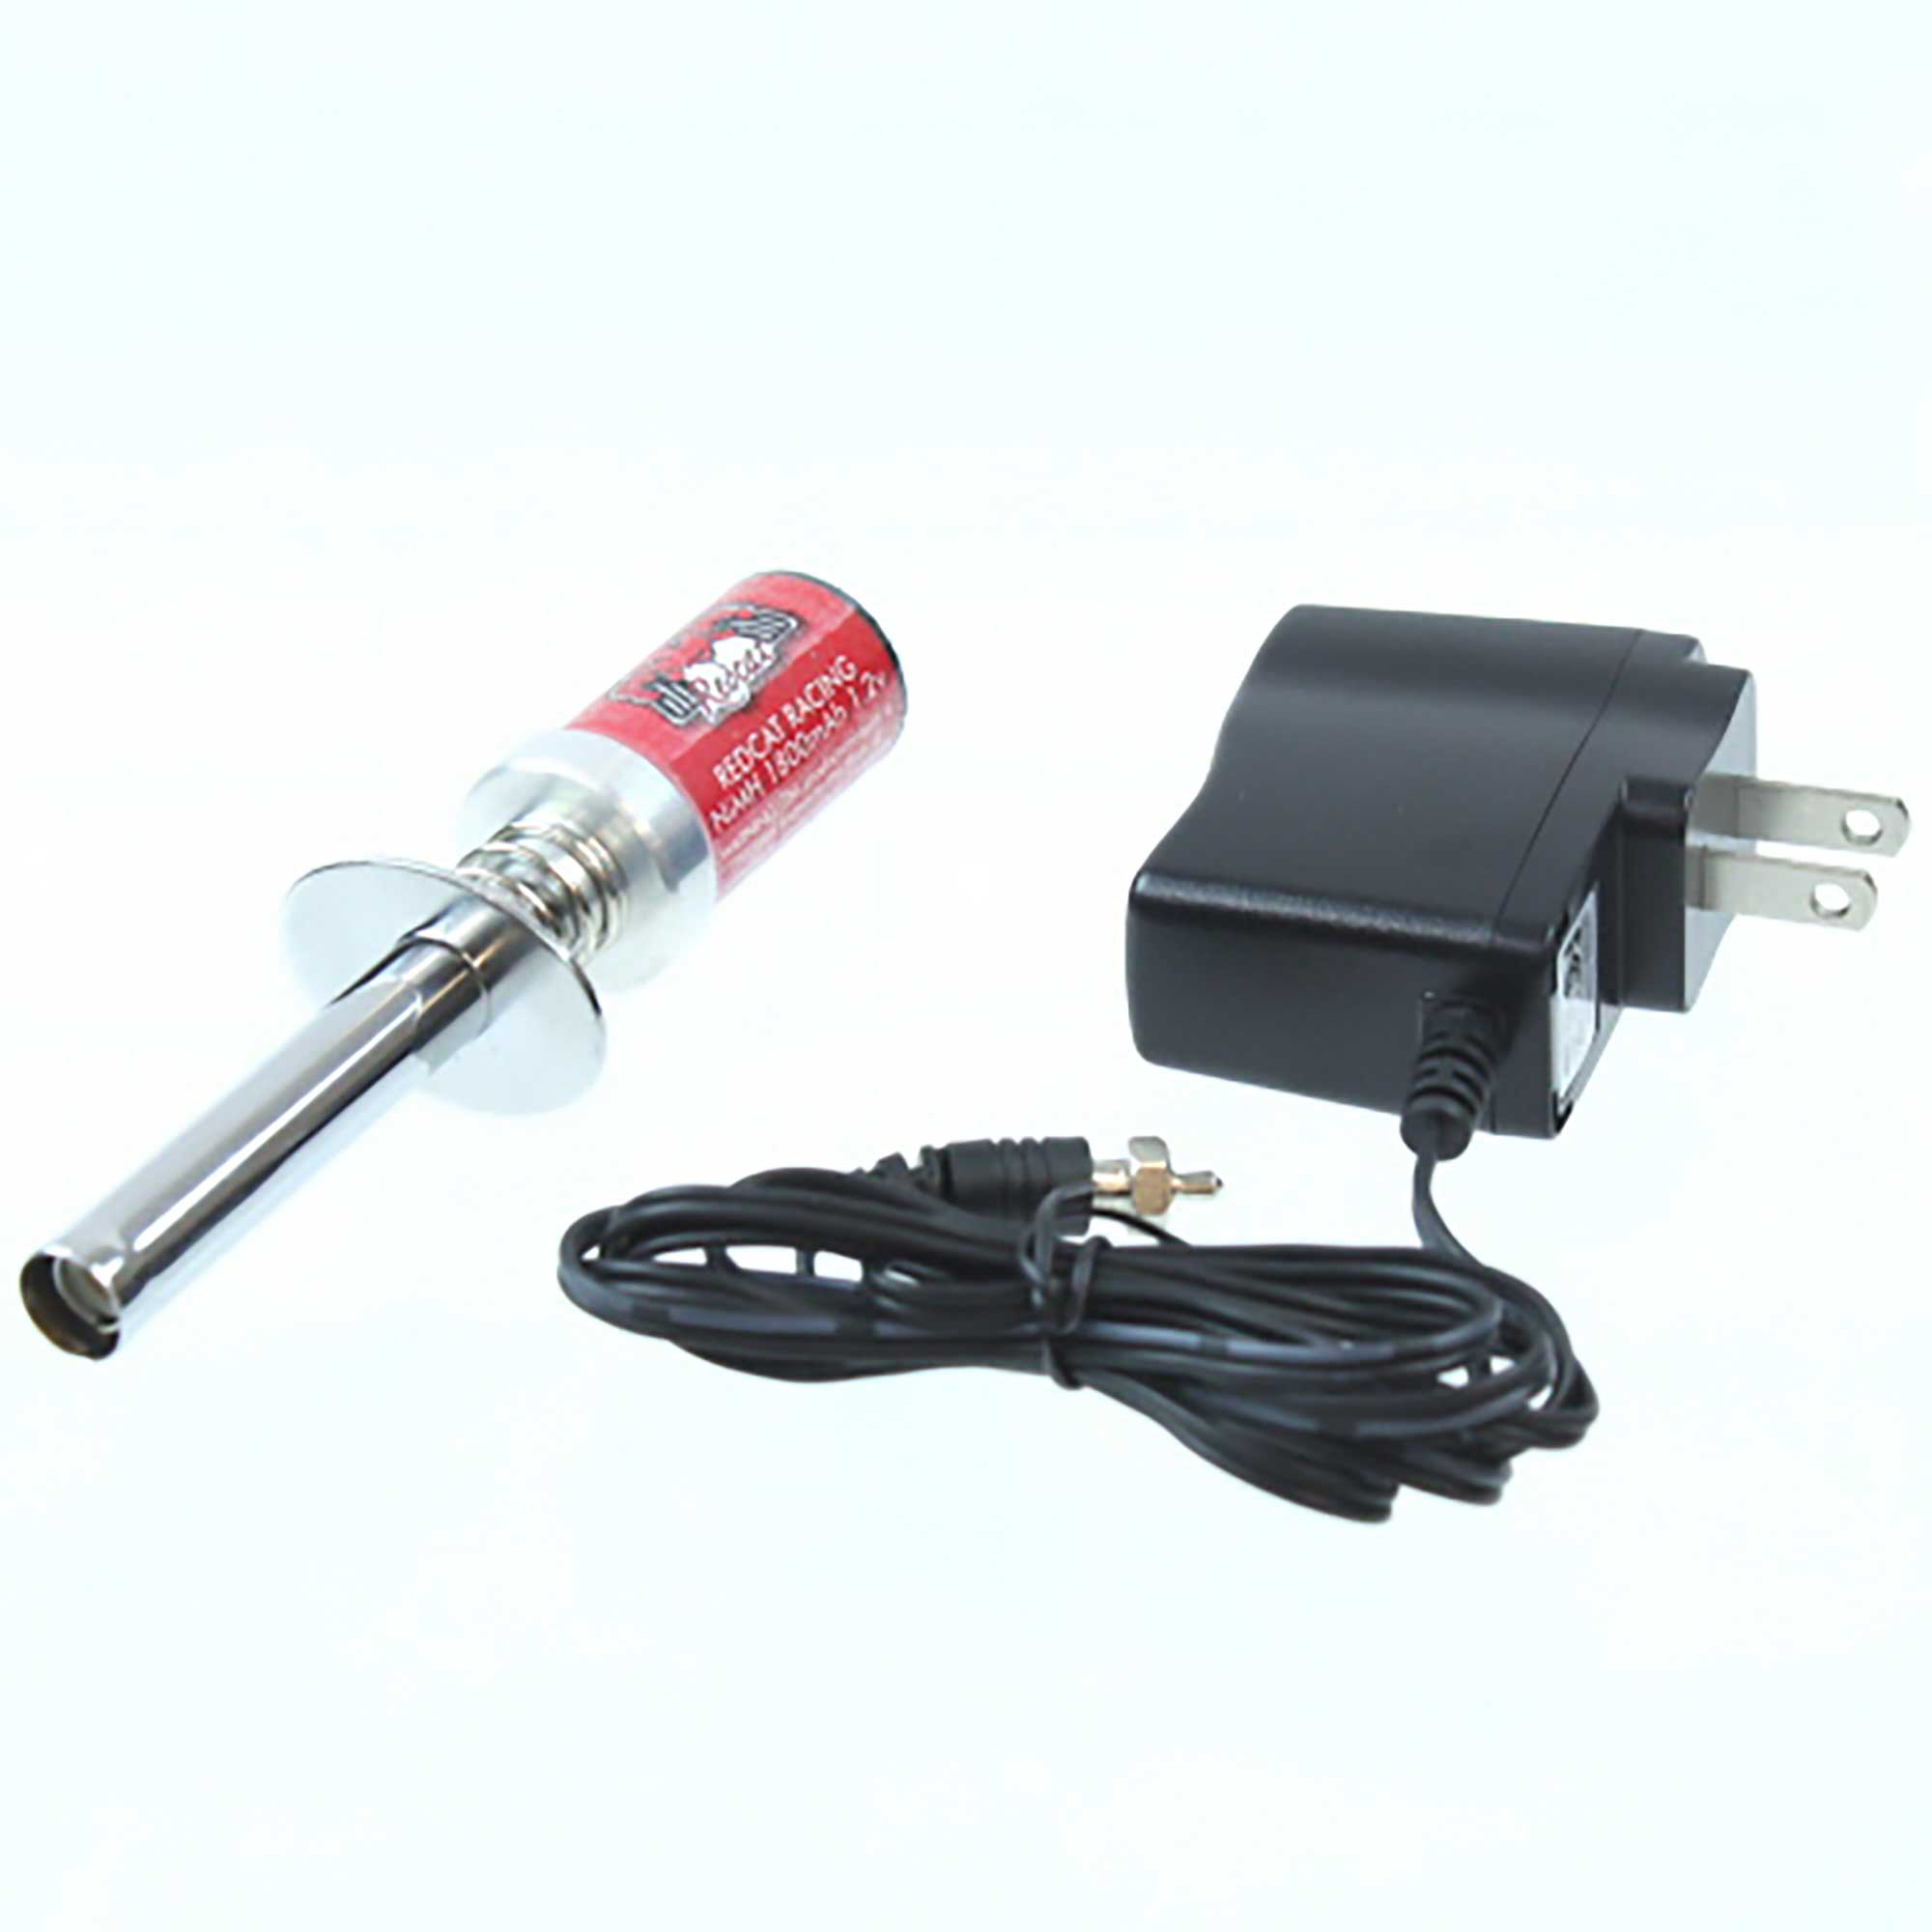 Redcat Glow Plug Igniter w/Charger RER05370 